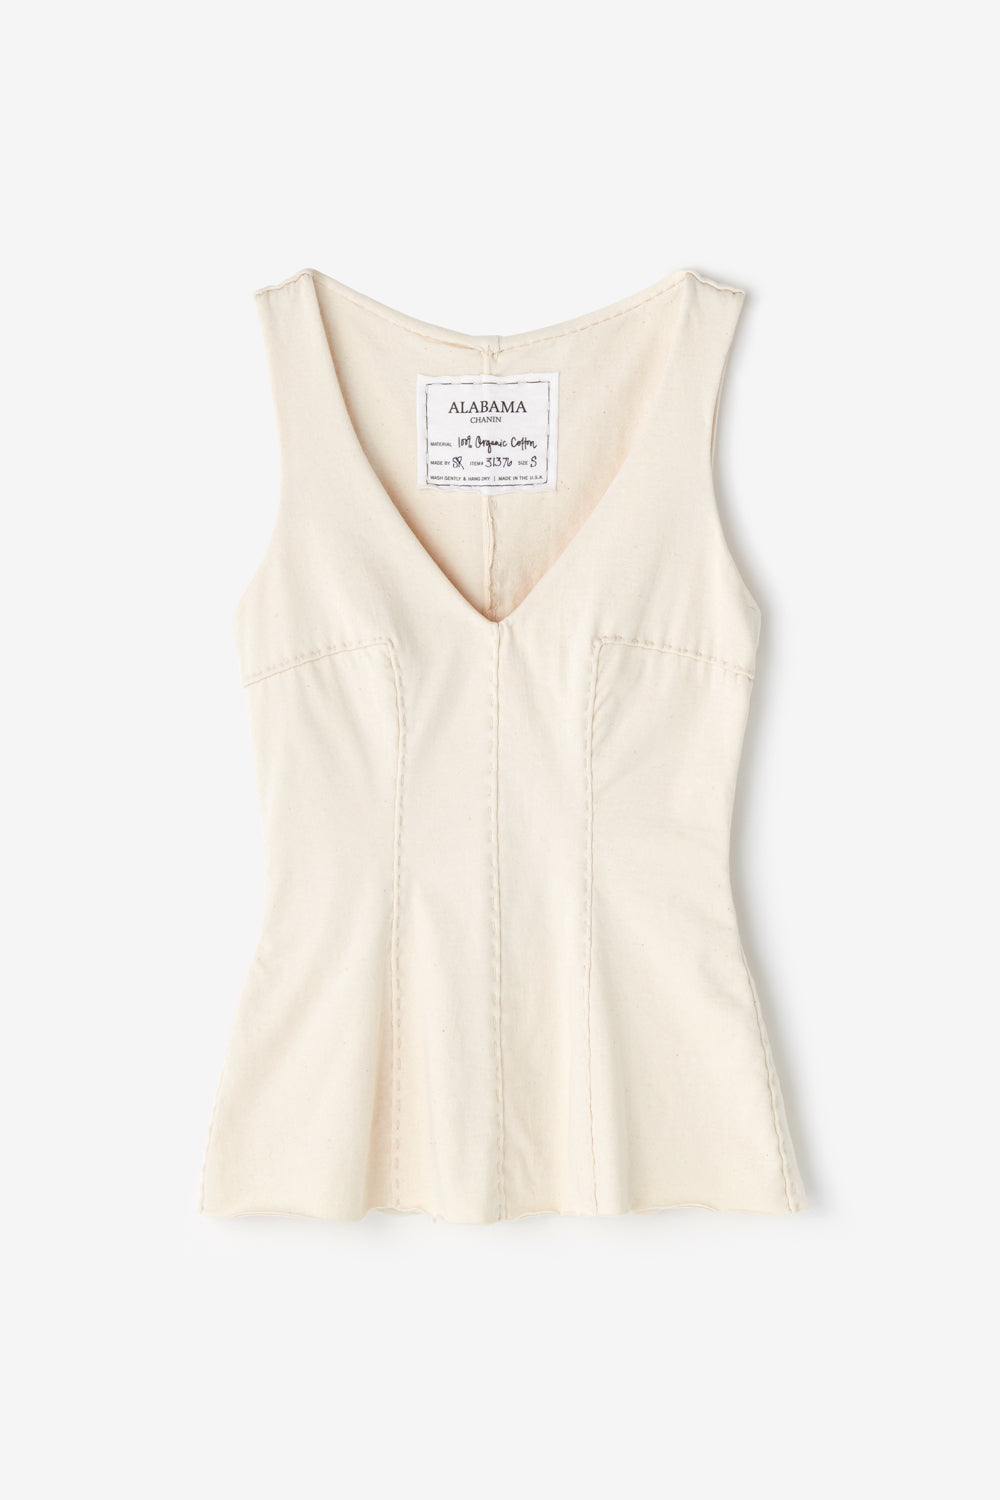 Alabama Chanin Lola Top in natural with elevated v-neck soft knit jersey 100% organic cotton.